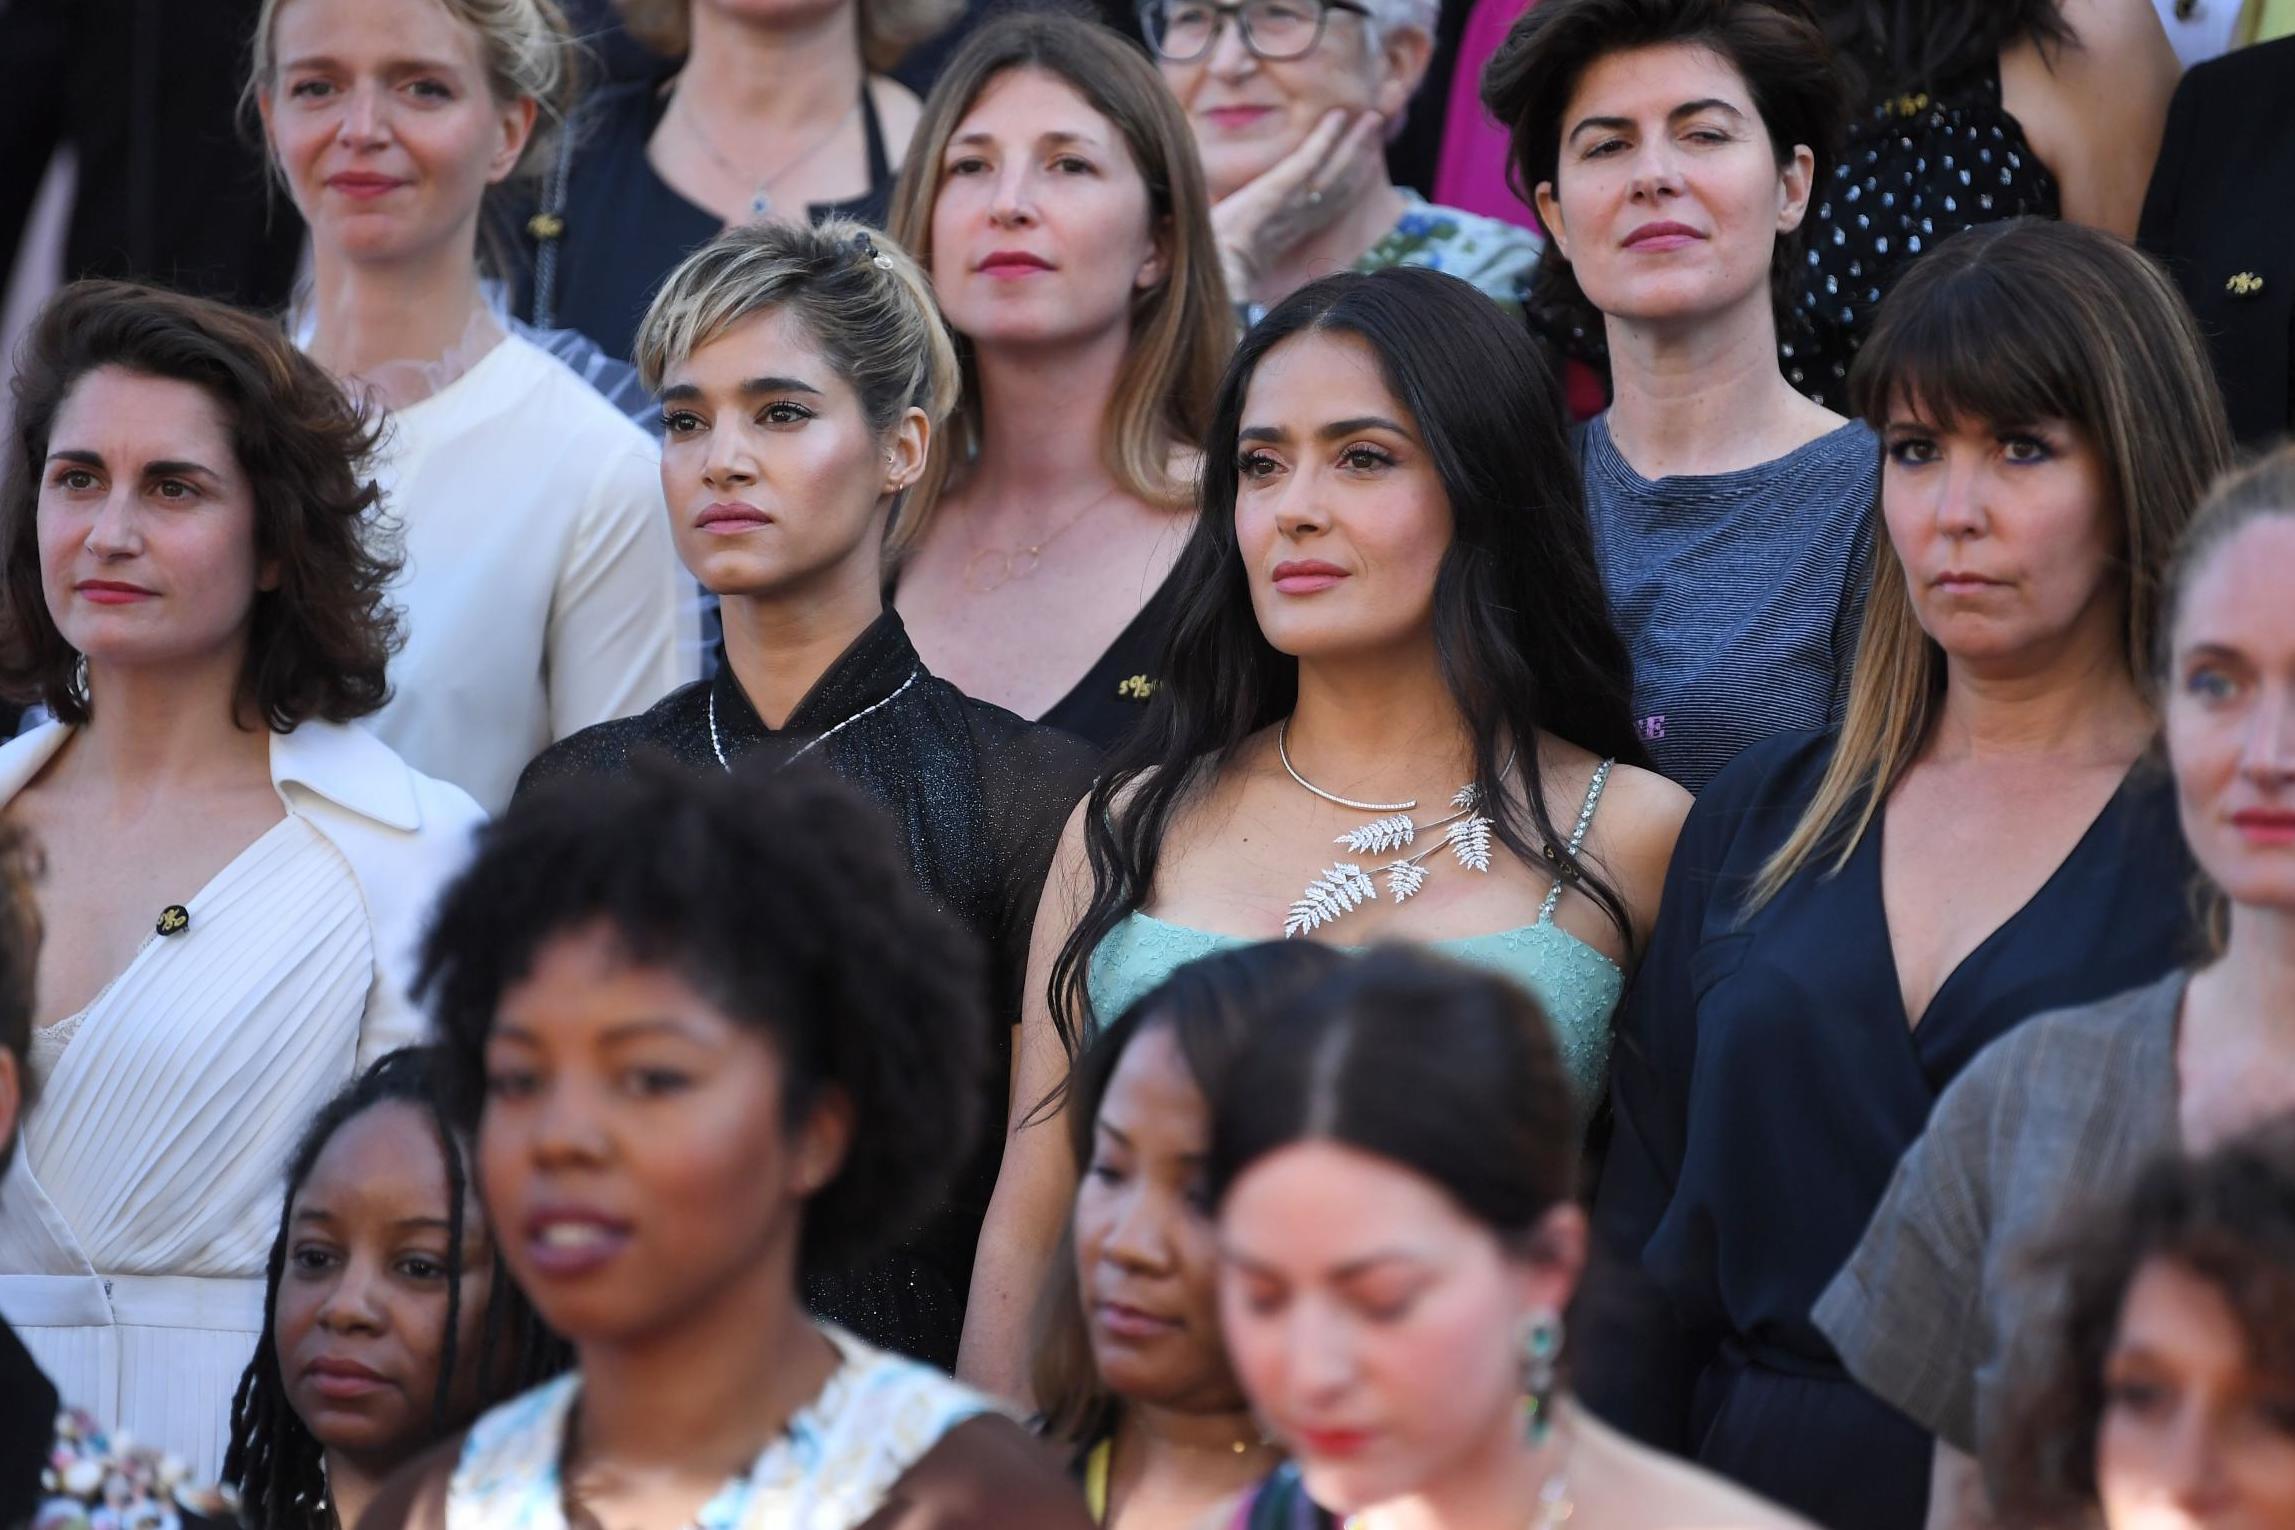 A group of 82 women stood in silence on the red carpet at Cannes Film Festival in support of Time's Up